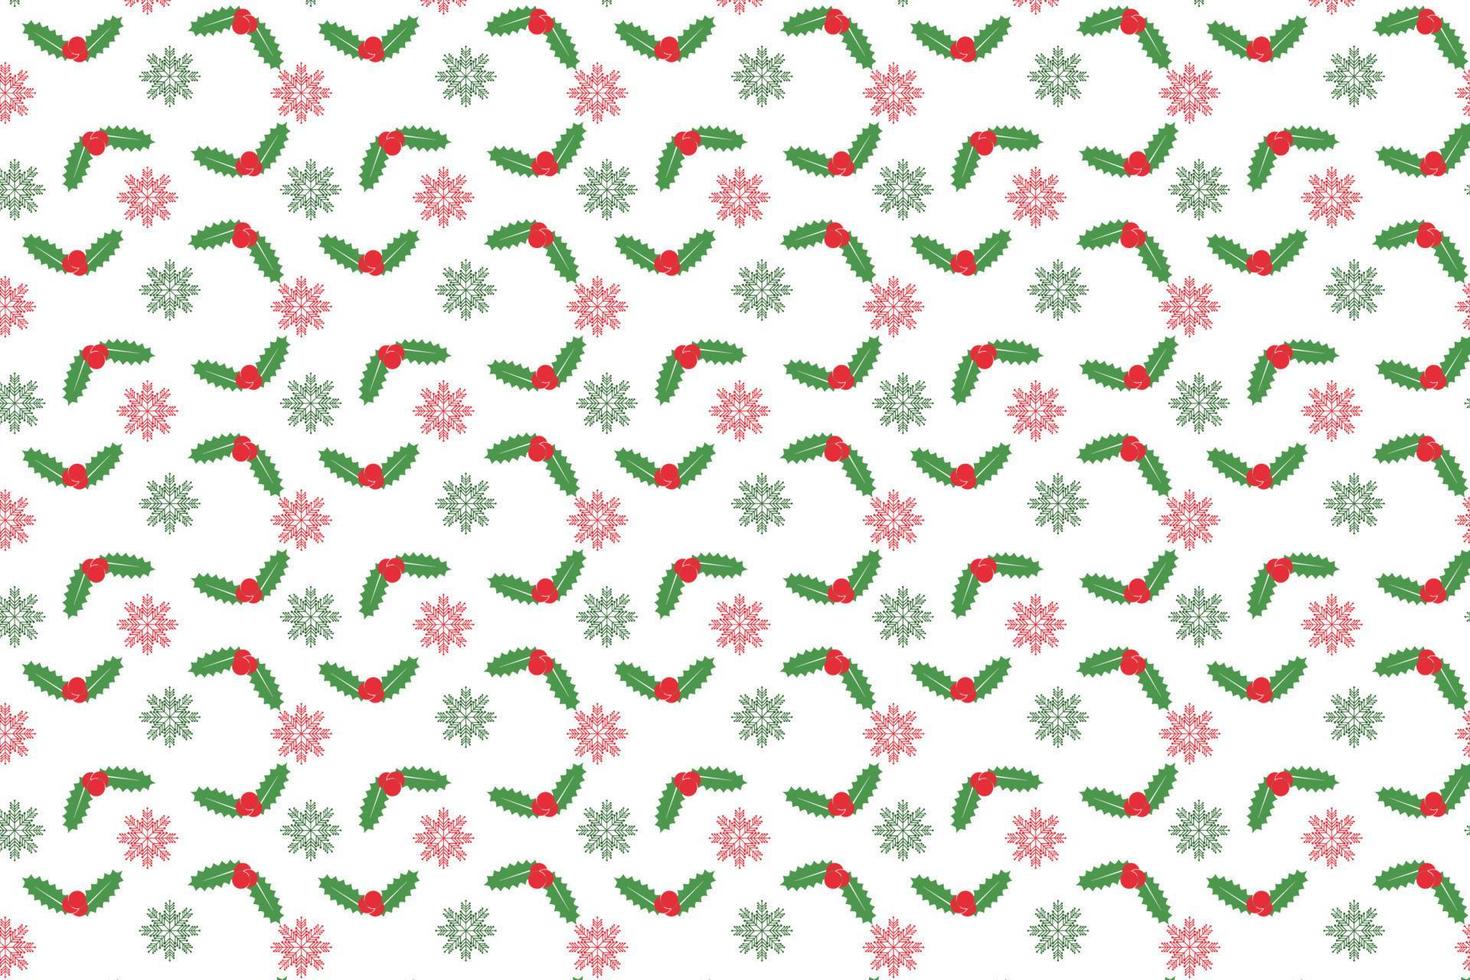 Abstract Christmas pattern vector with green leaves and red cherries. Christmas wrapping paper and book cover decoration pattern design. Minimal Christmas pattern on a white background with snowflakes